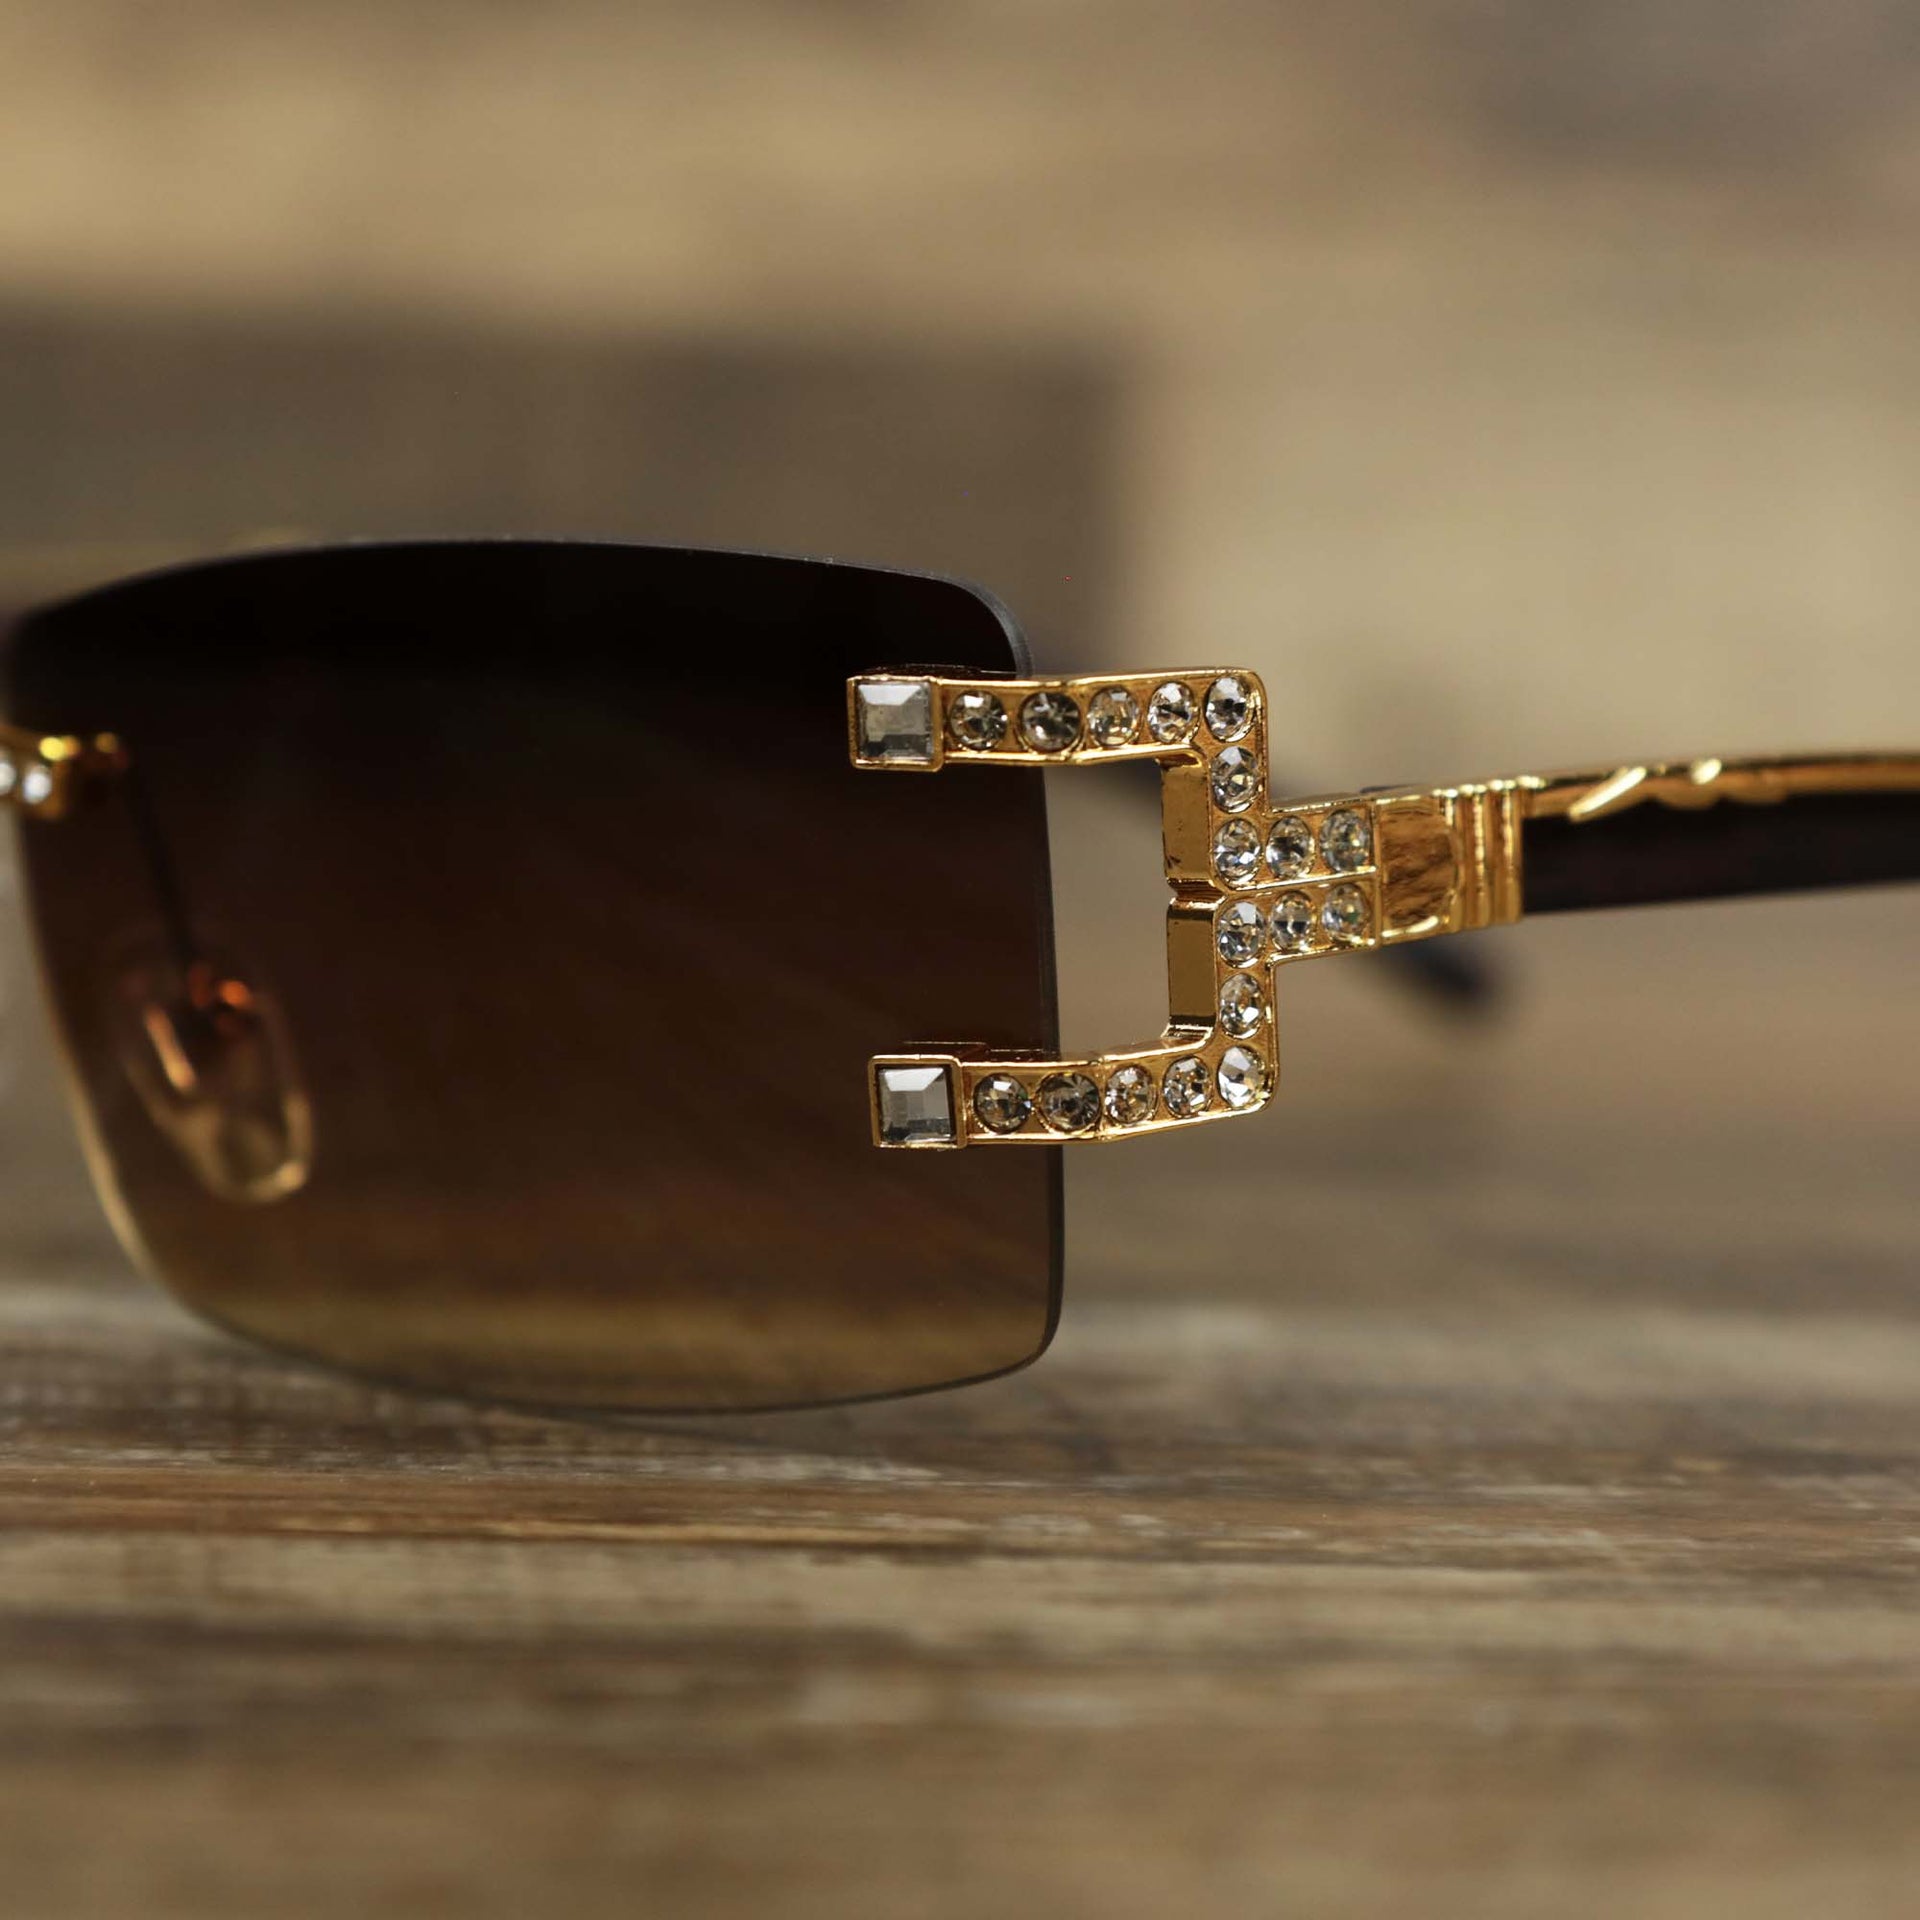 The hinge of the Rectangle Frames Brown Gradient Lens Flooded Sunglasses with Gold Frame